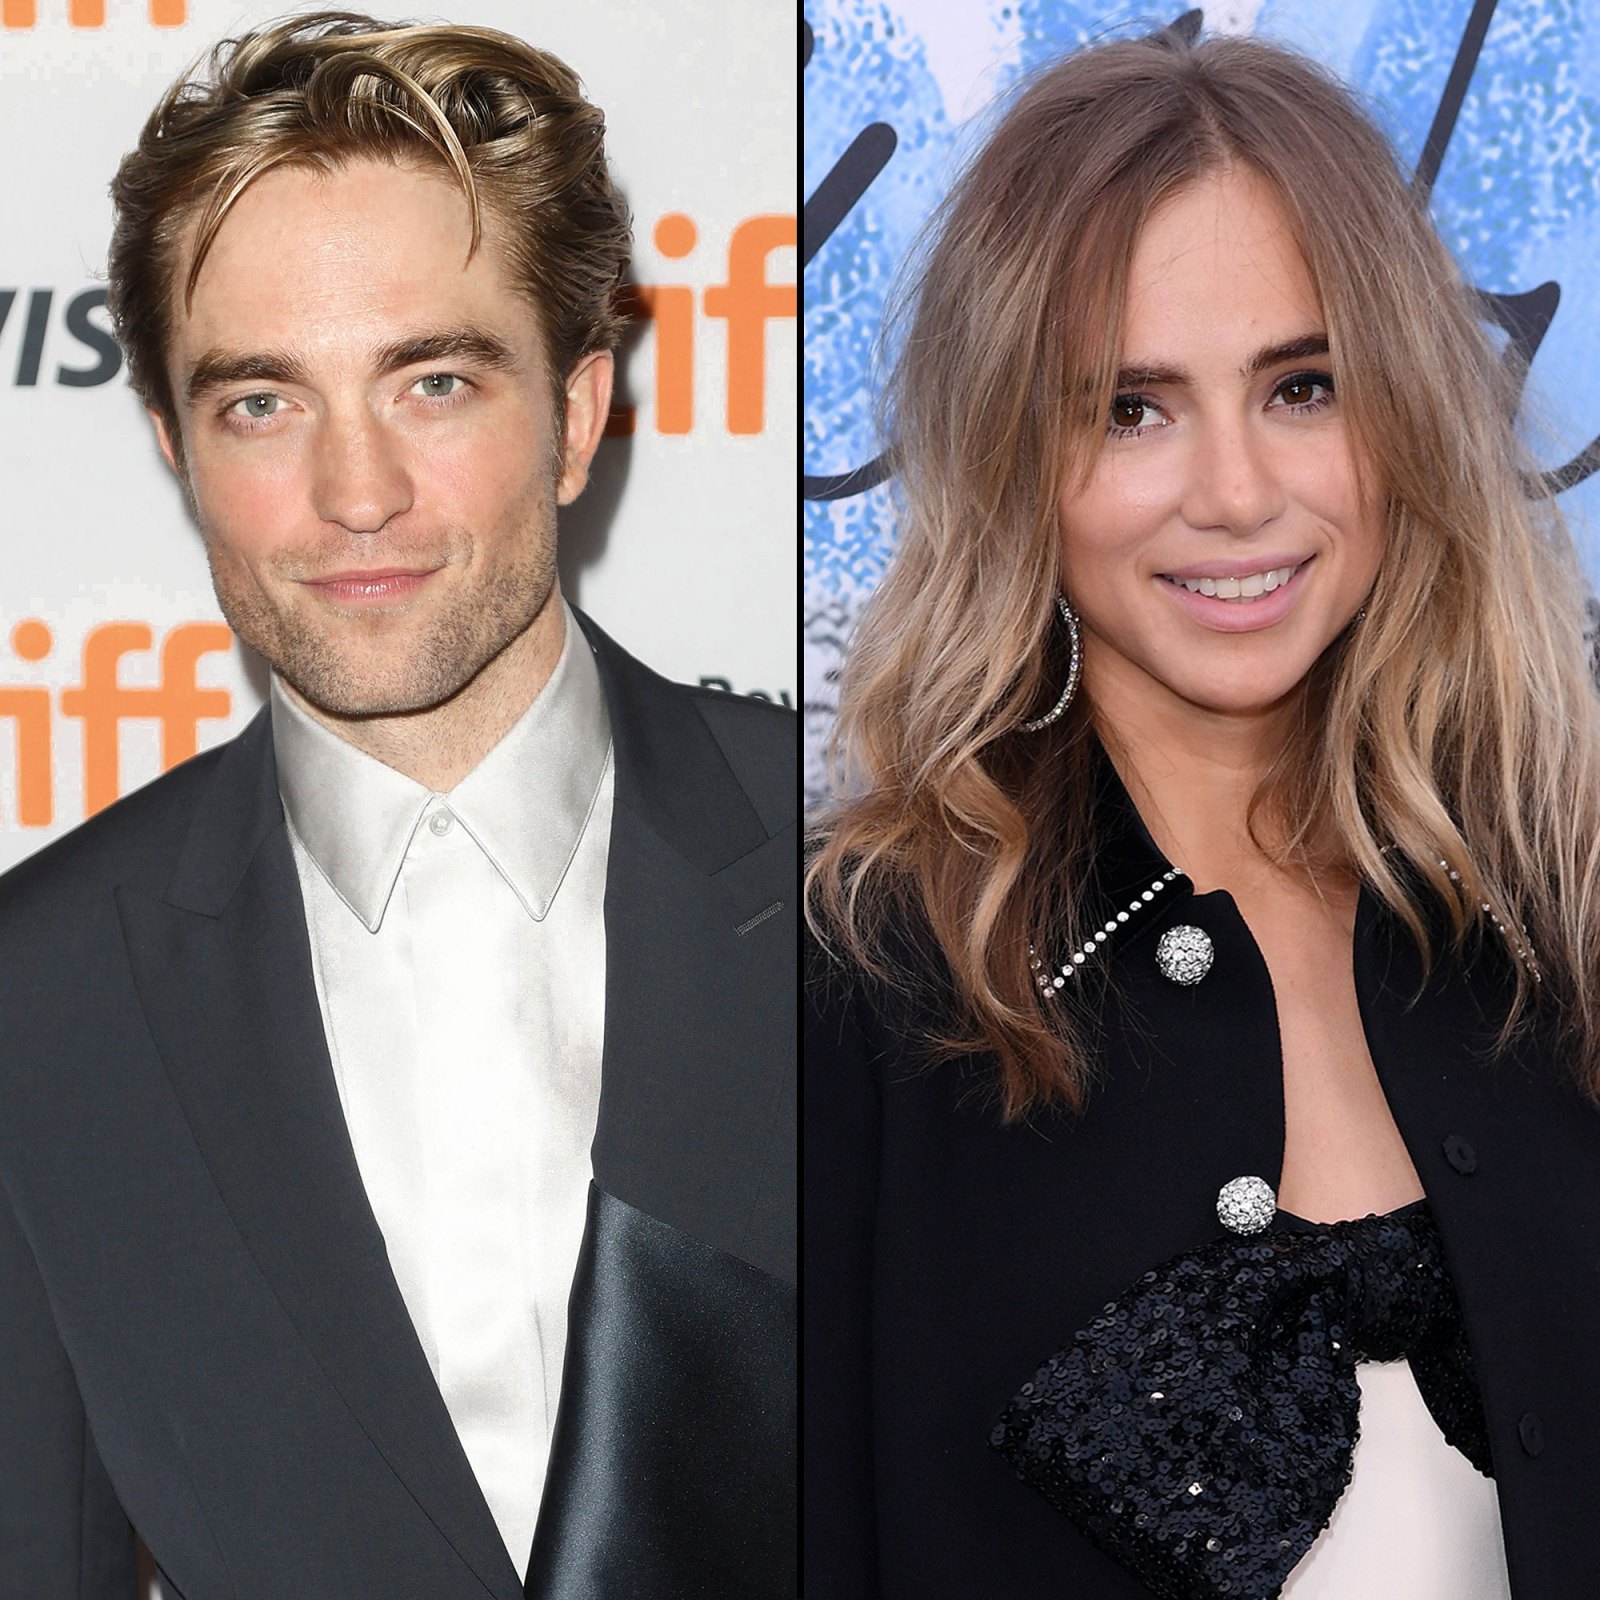 The Twilight actor and the Assassination Nation actress have avoided red carpets their entire relationship because they would rather keep their love life private. It's on purpose, says Pattinson, that the British couple keeps their personal lives quiet.